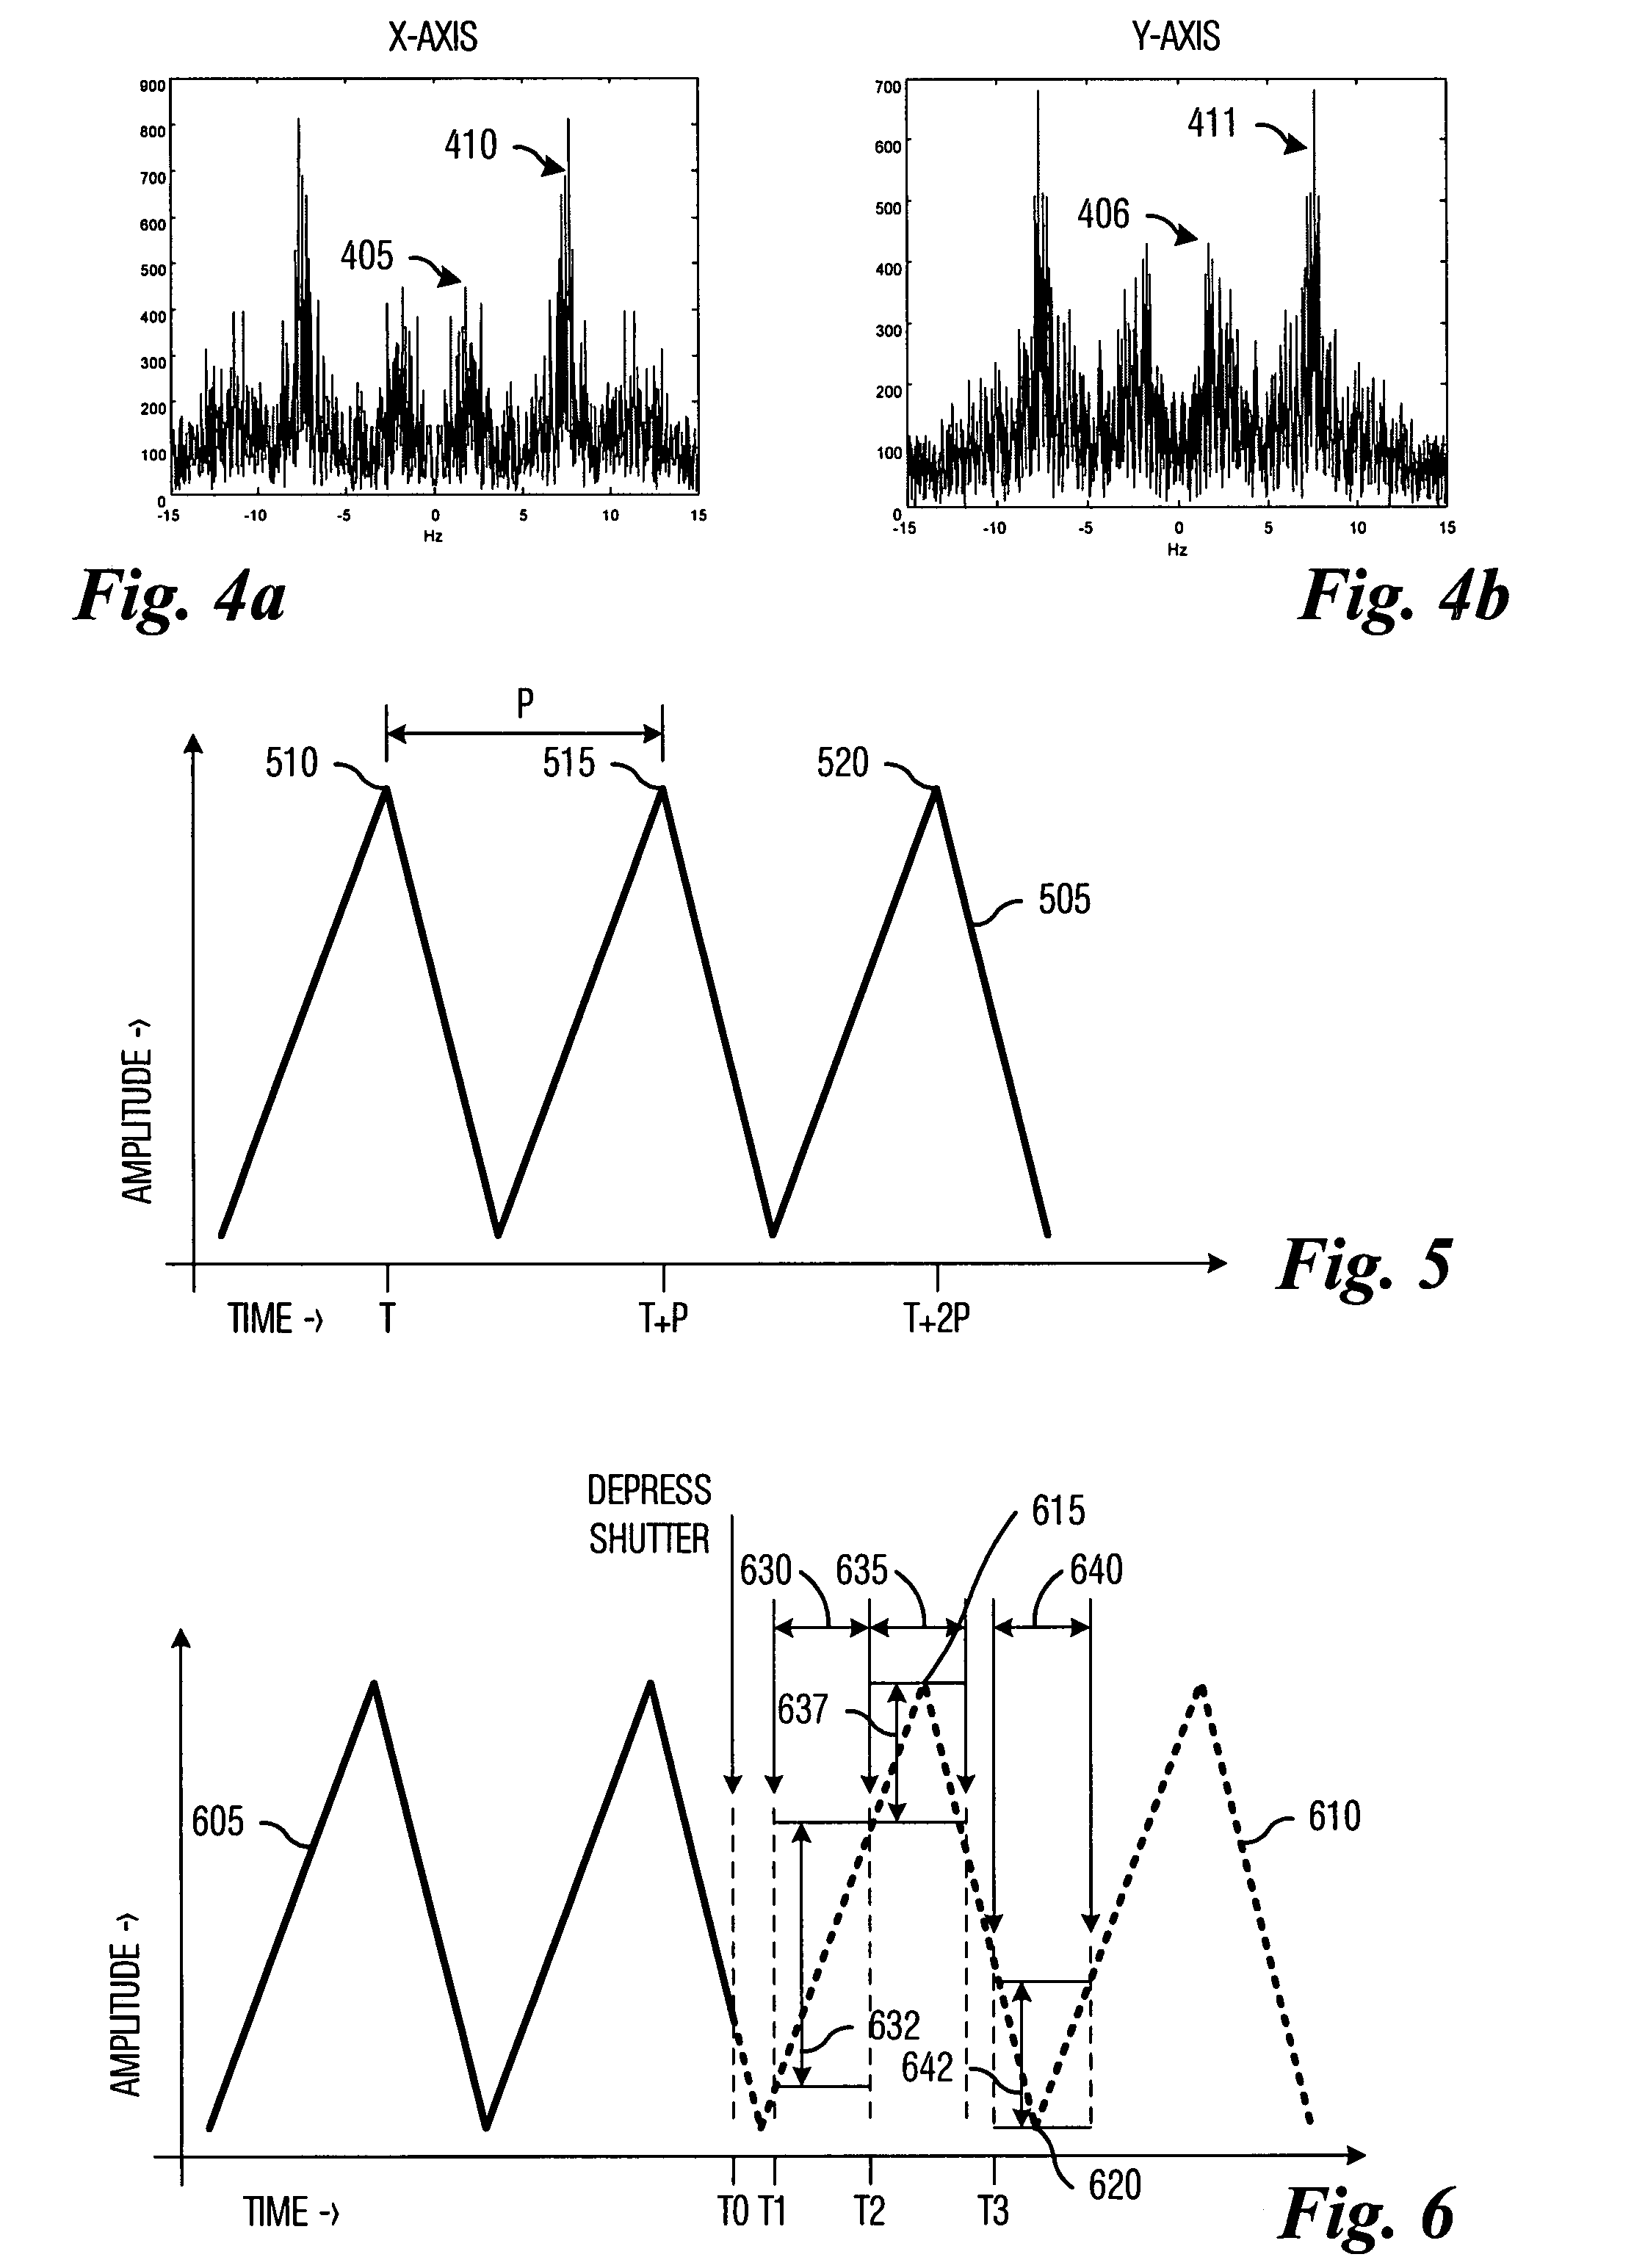 System and method for capturing images